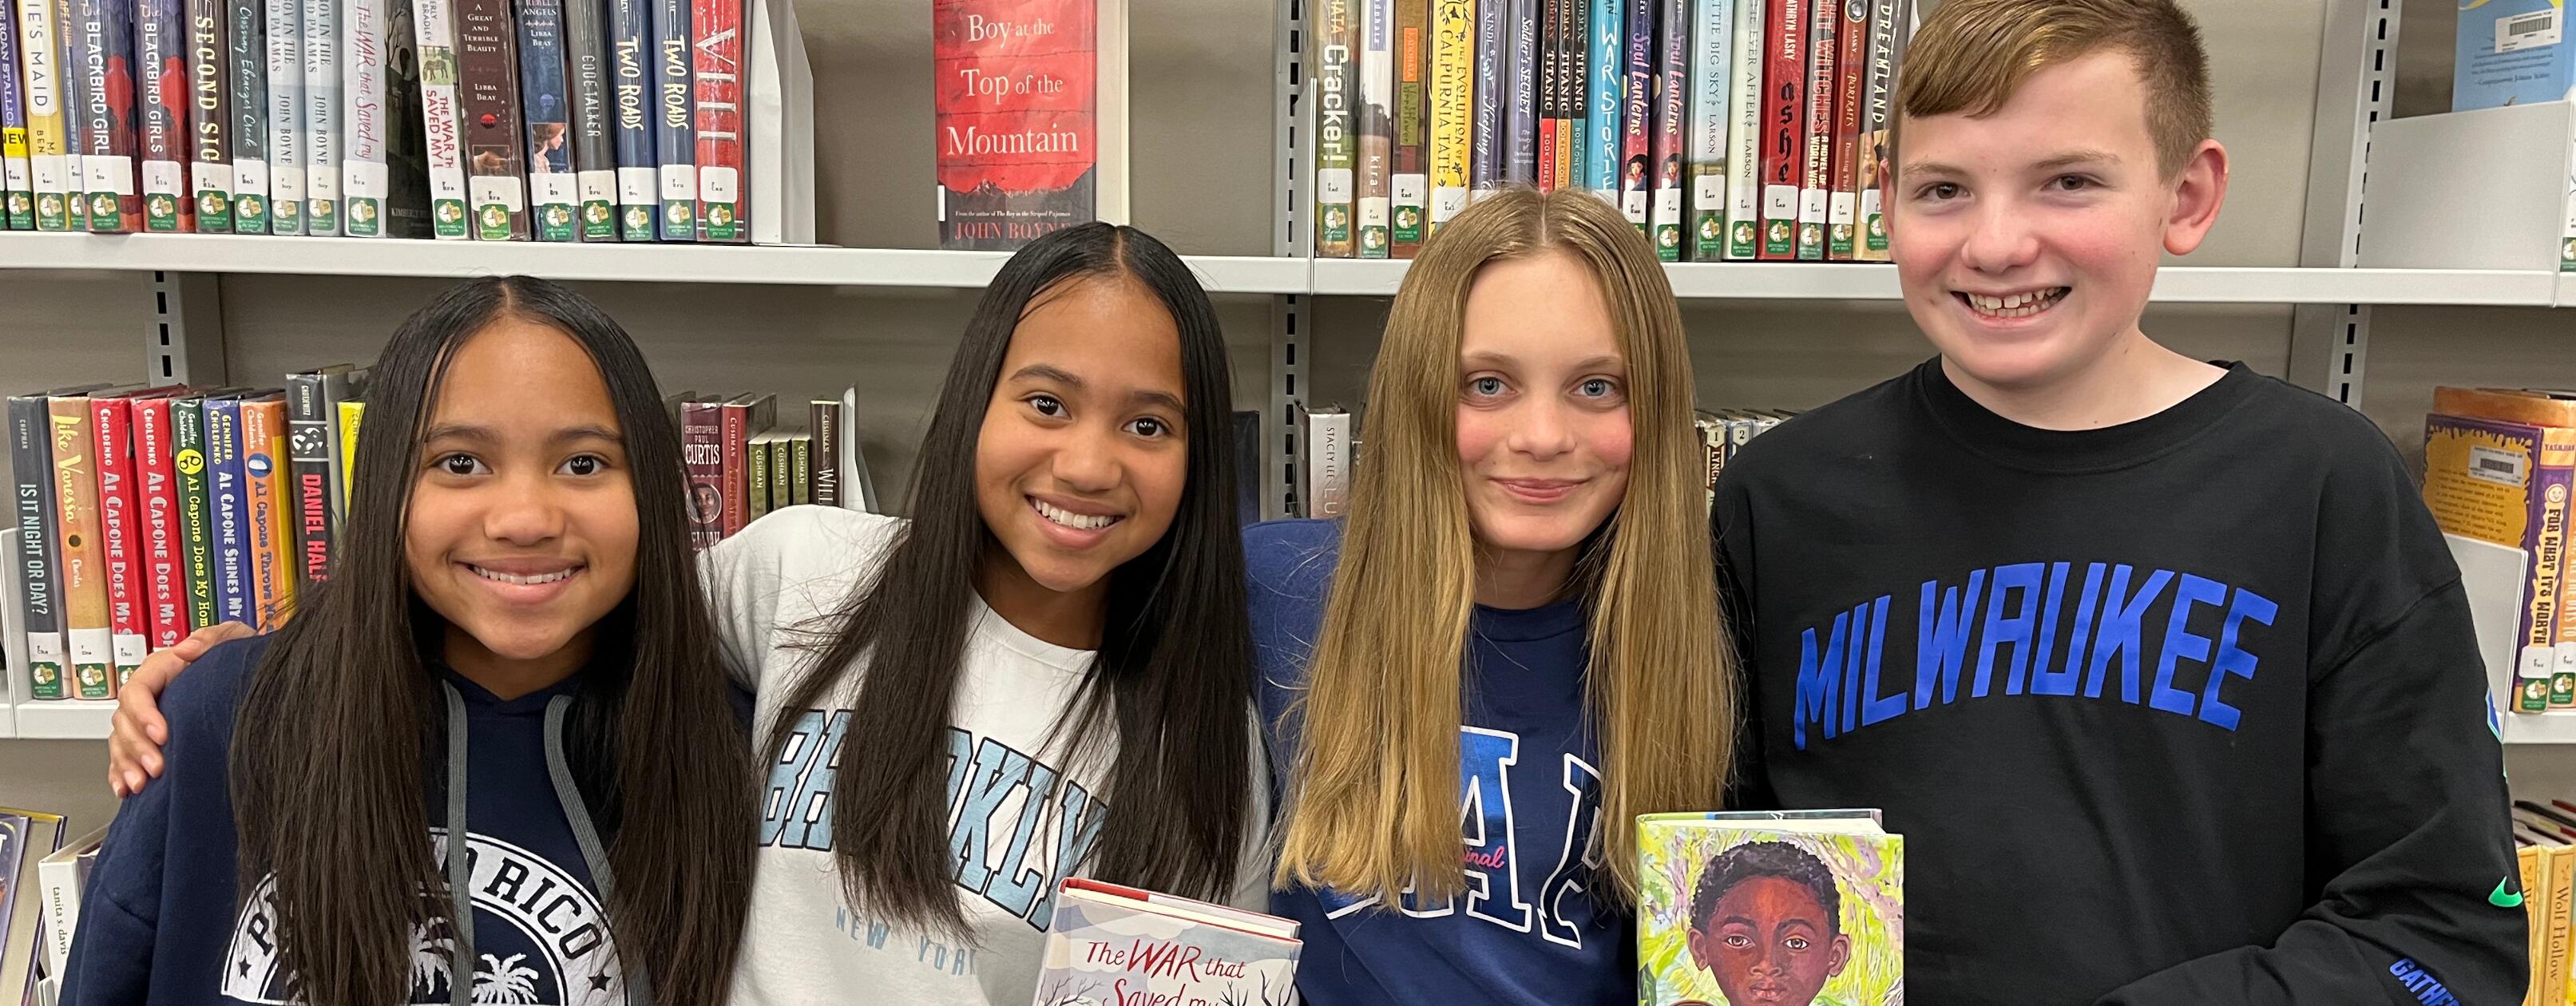 students holding books in the school library